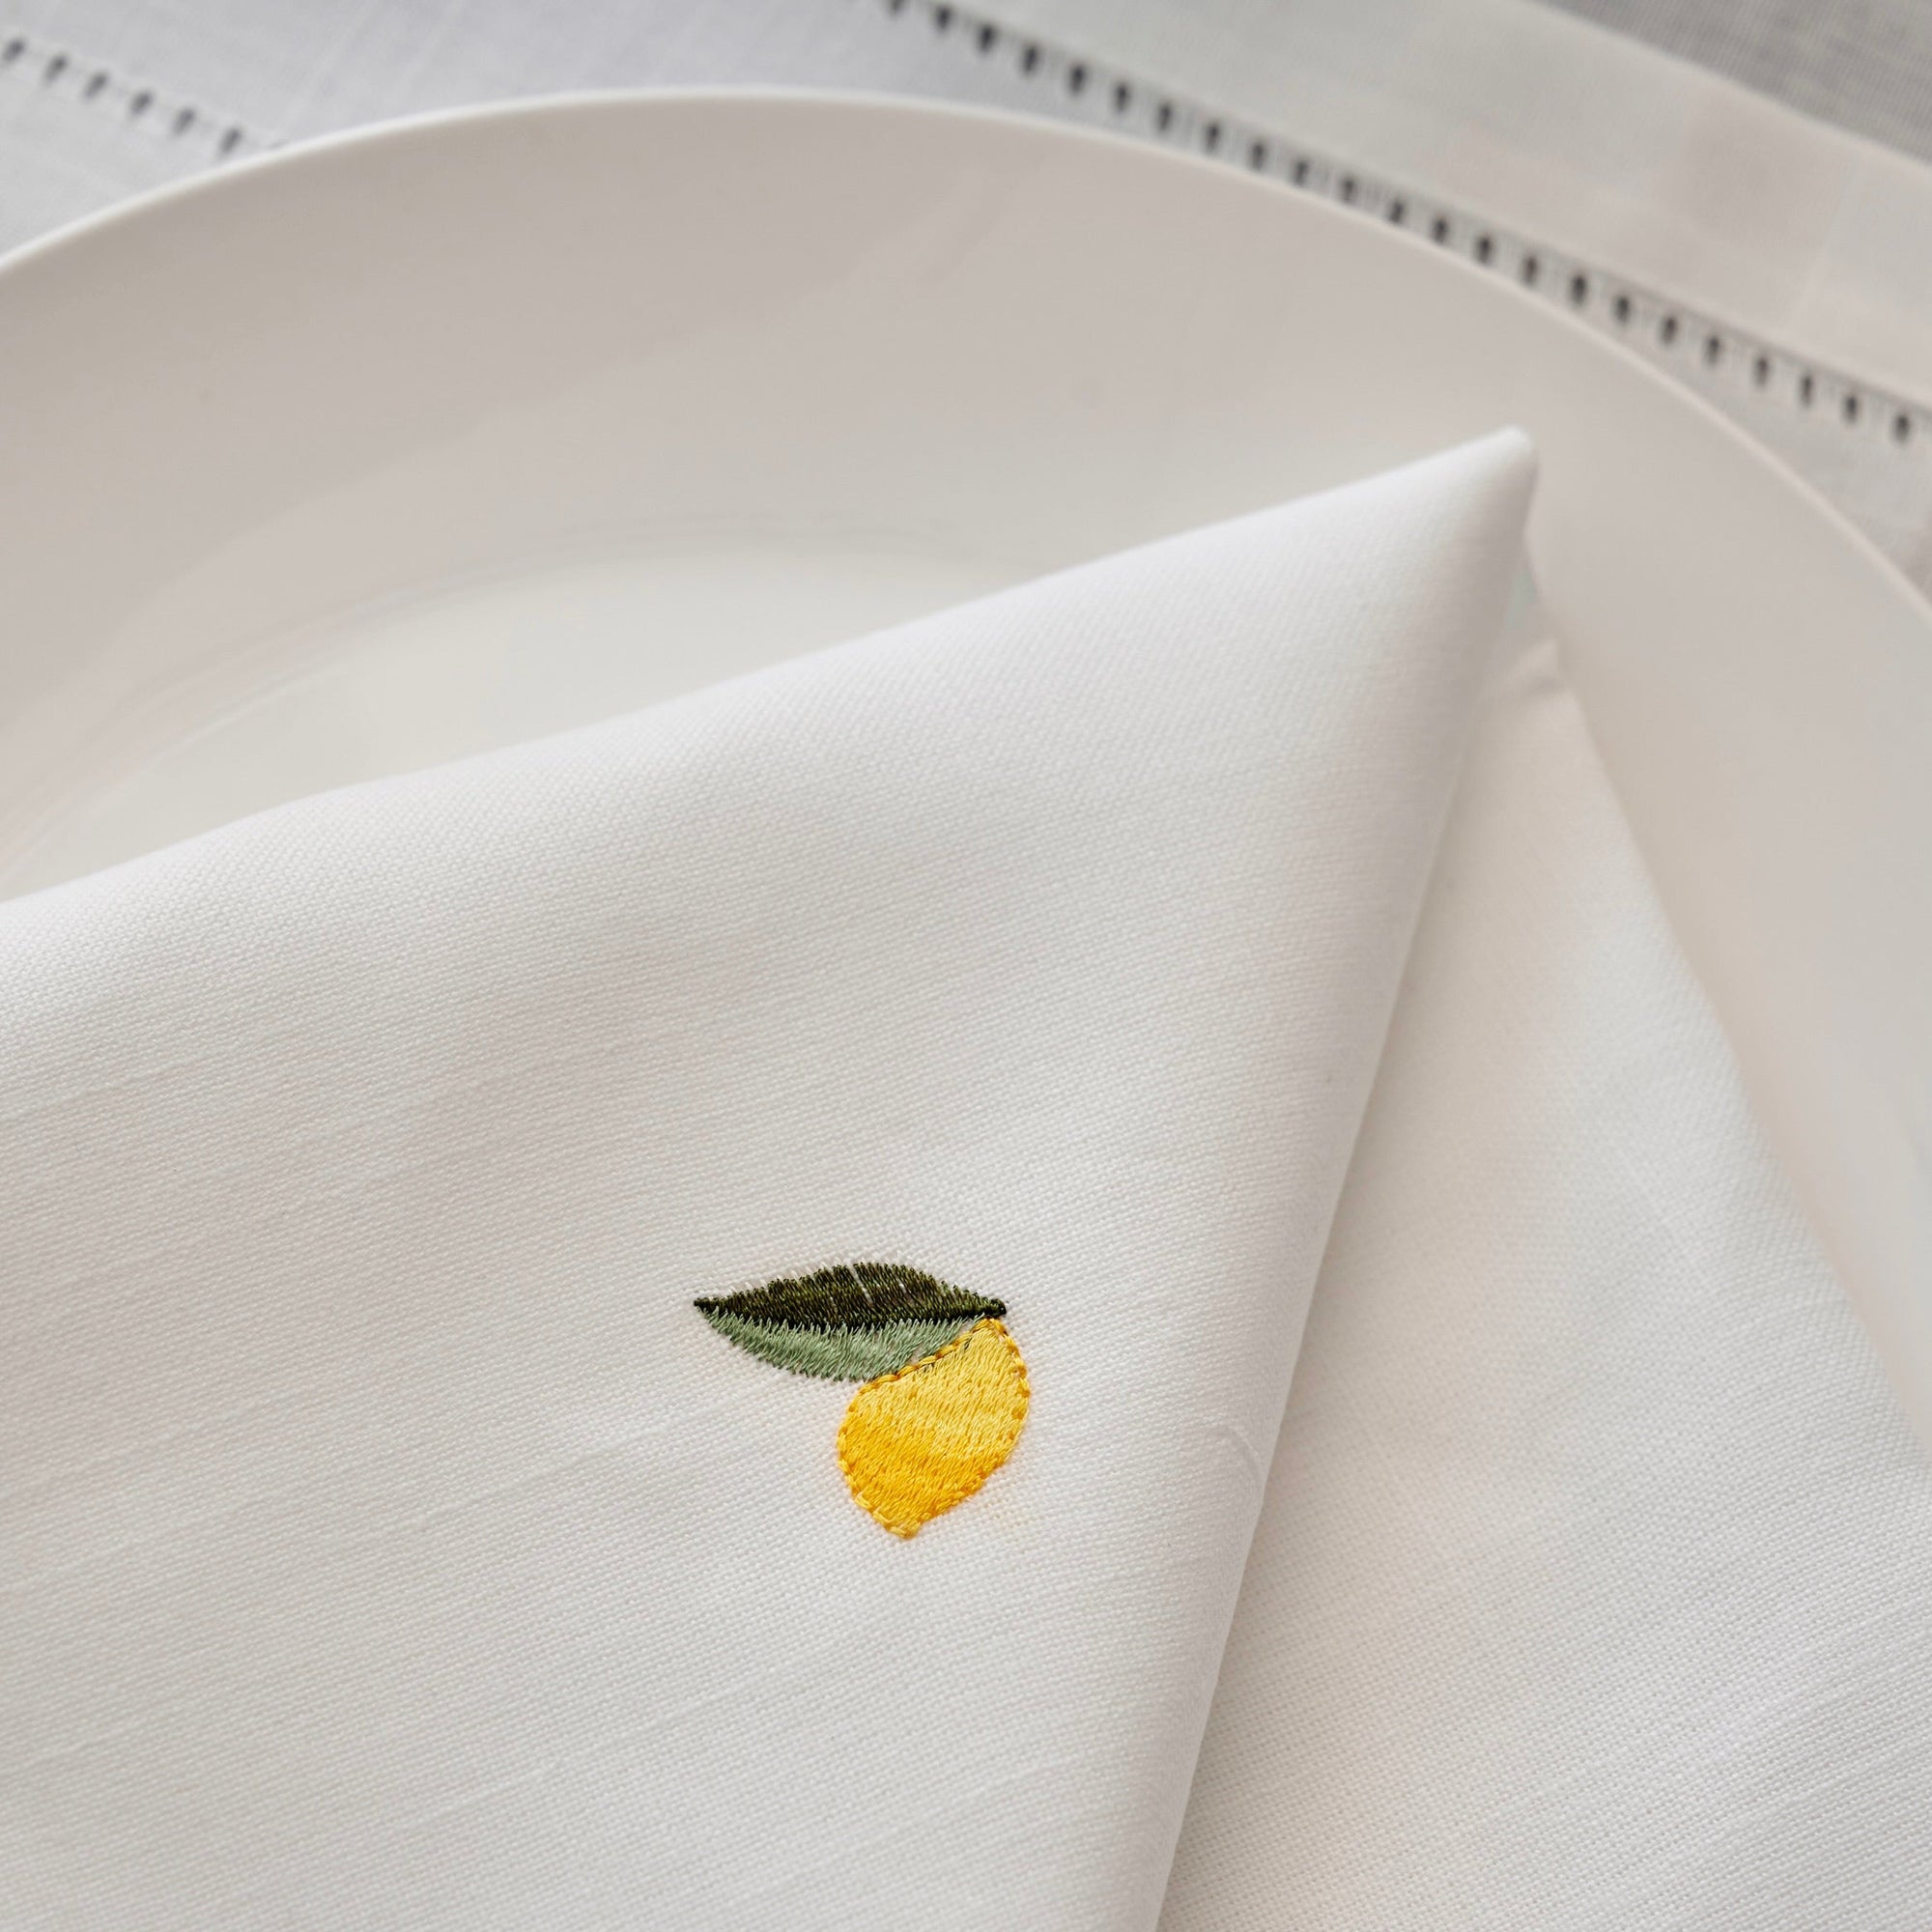 Lemon Cotton and Linen Blend Napkins, Set of Four - The Finishing Store South Africa